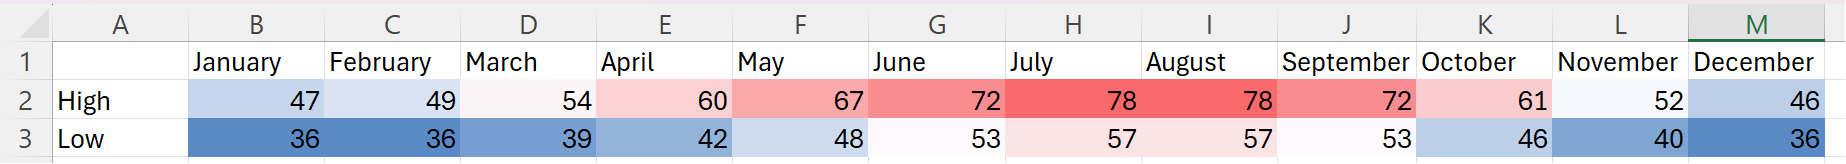 A table of temperatures with the lower values colored blue and the higher ones colored red.